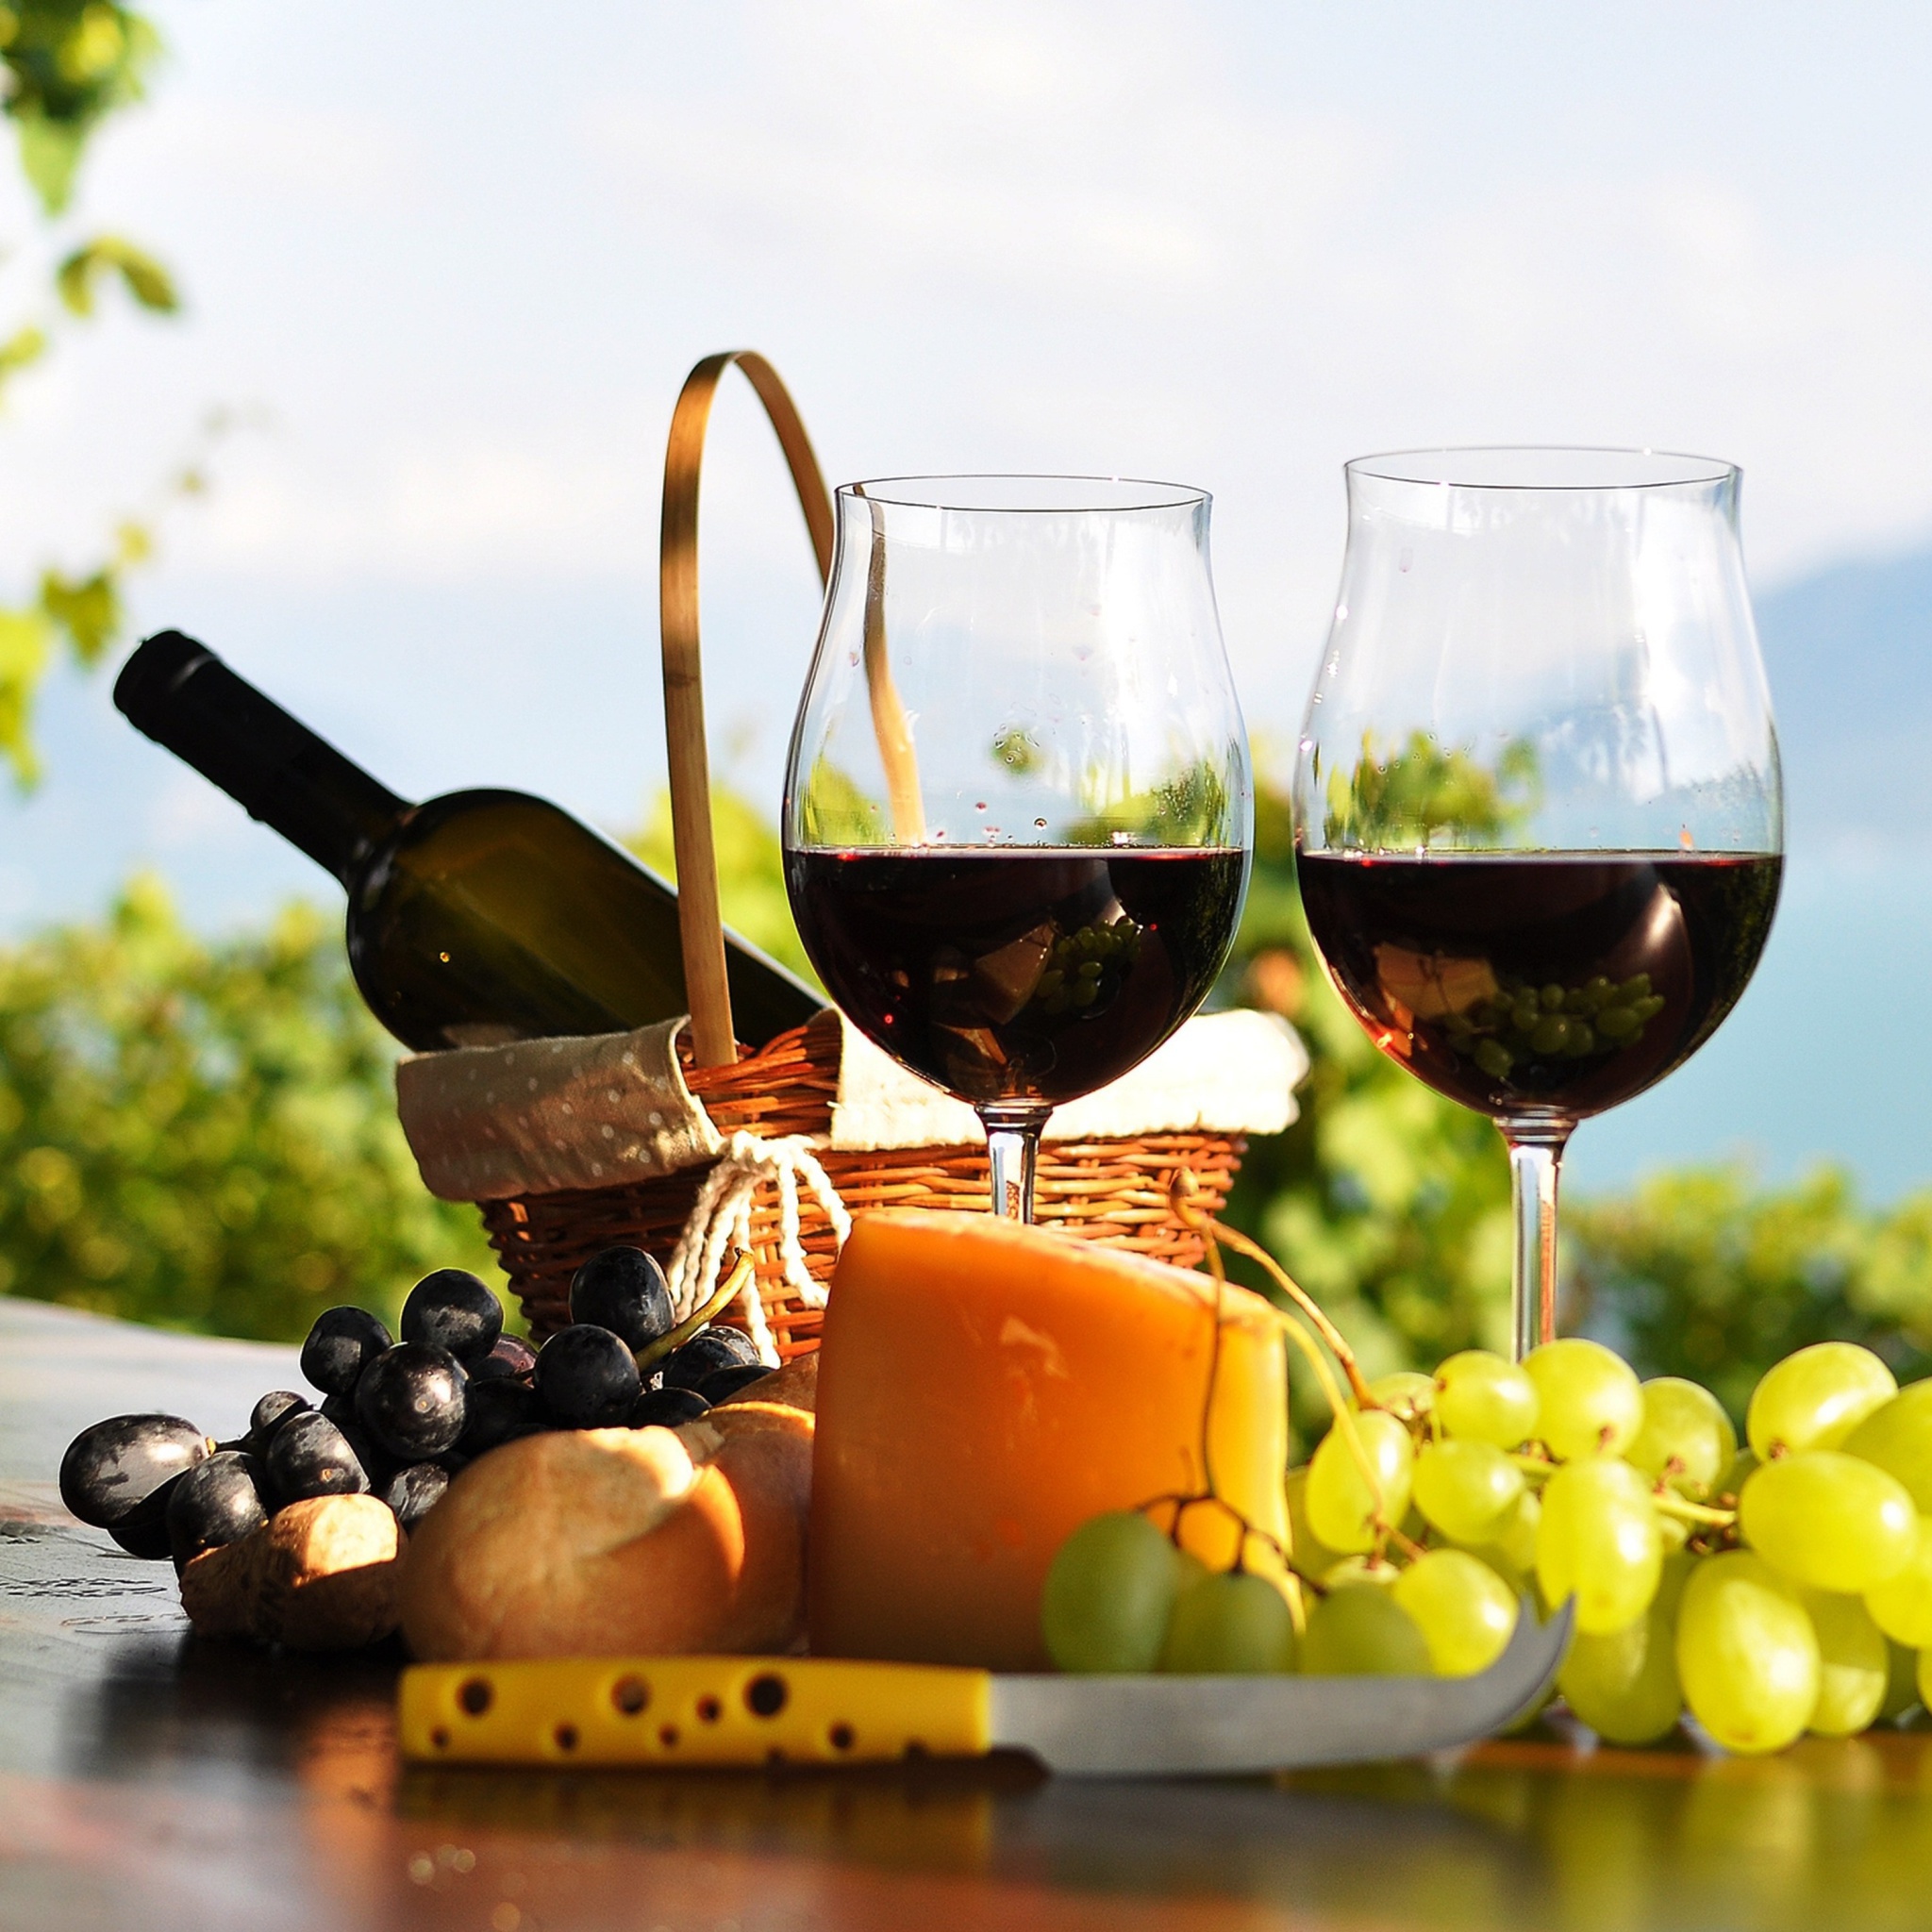 Das Picnic with wine and grapes Wallpaper 2048x2048